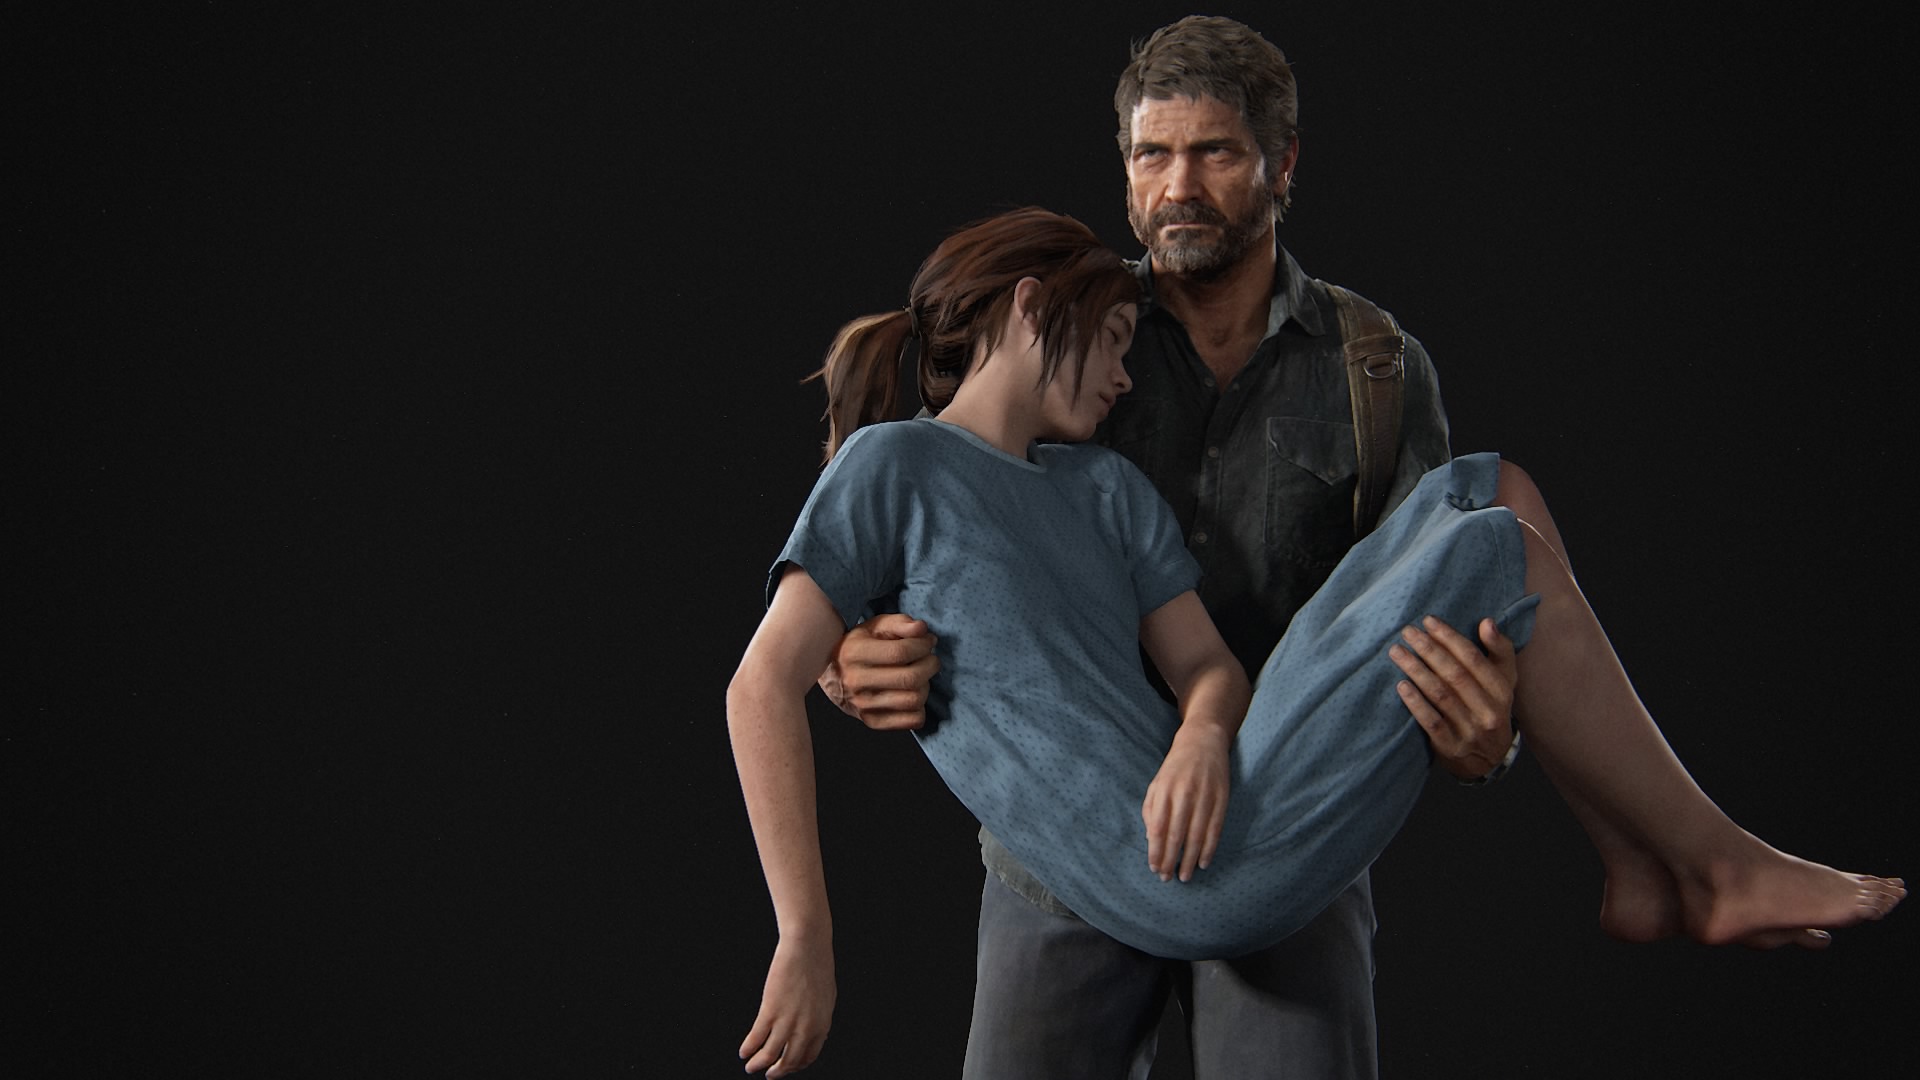 General 1920x1080 The Last of Us 2 PlayStation 4 Ellie Williams Joel Miller Naughty Dog video game characters